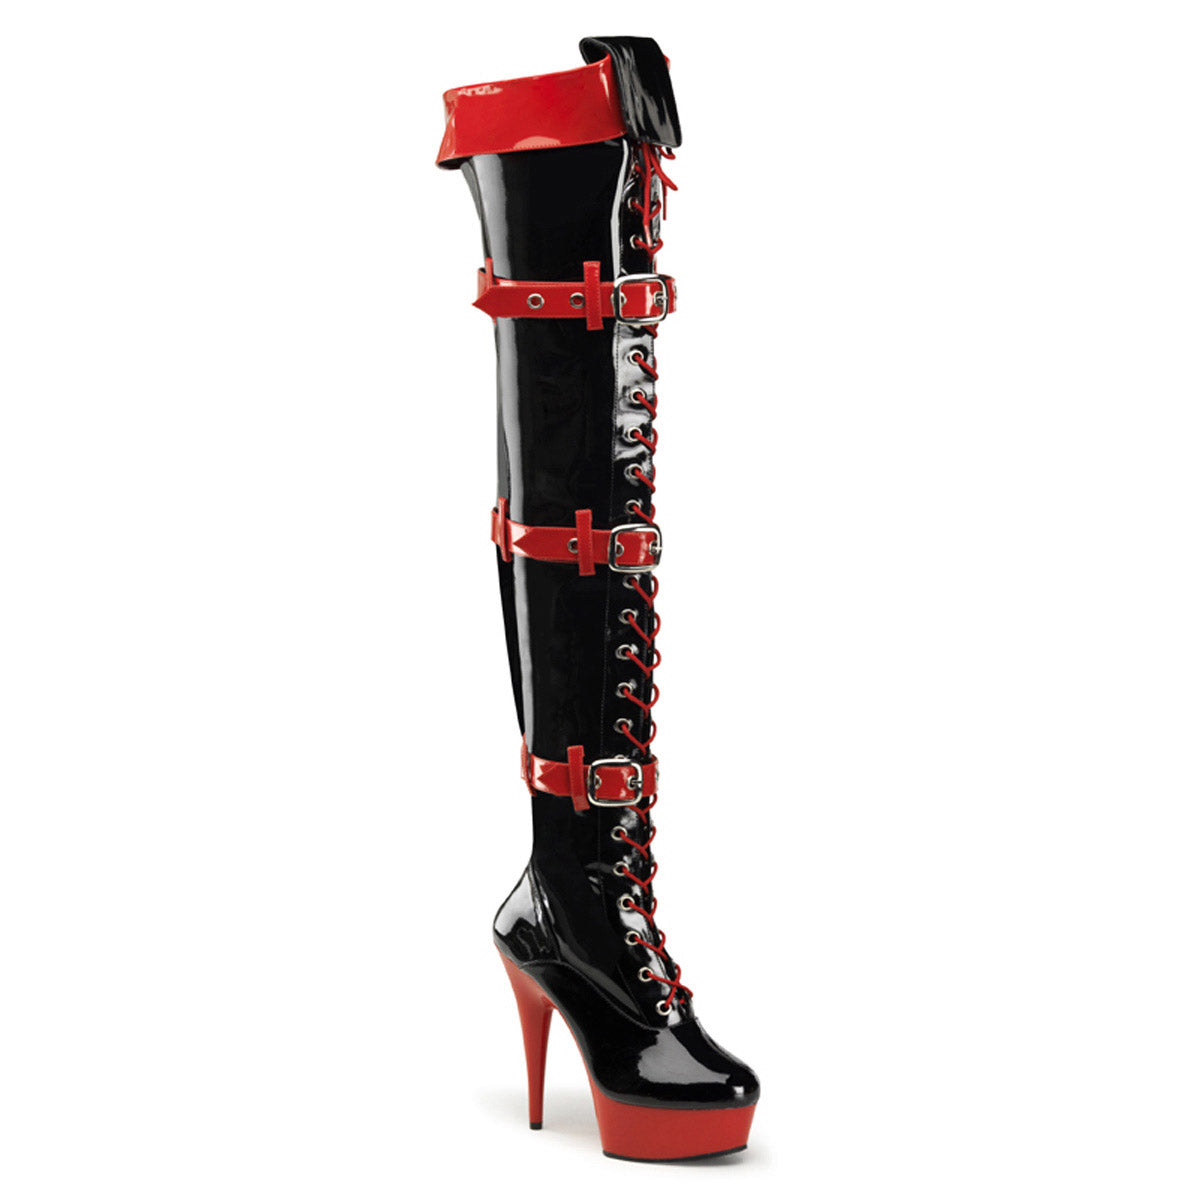 Sexy Buckle Strap Lace Up Platform Stiletto Thigh High Boots Shoes Pleaser Funtasma MEDIC/3028